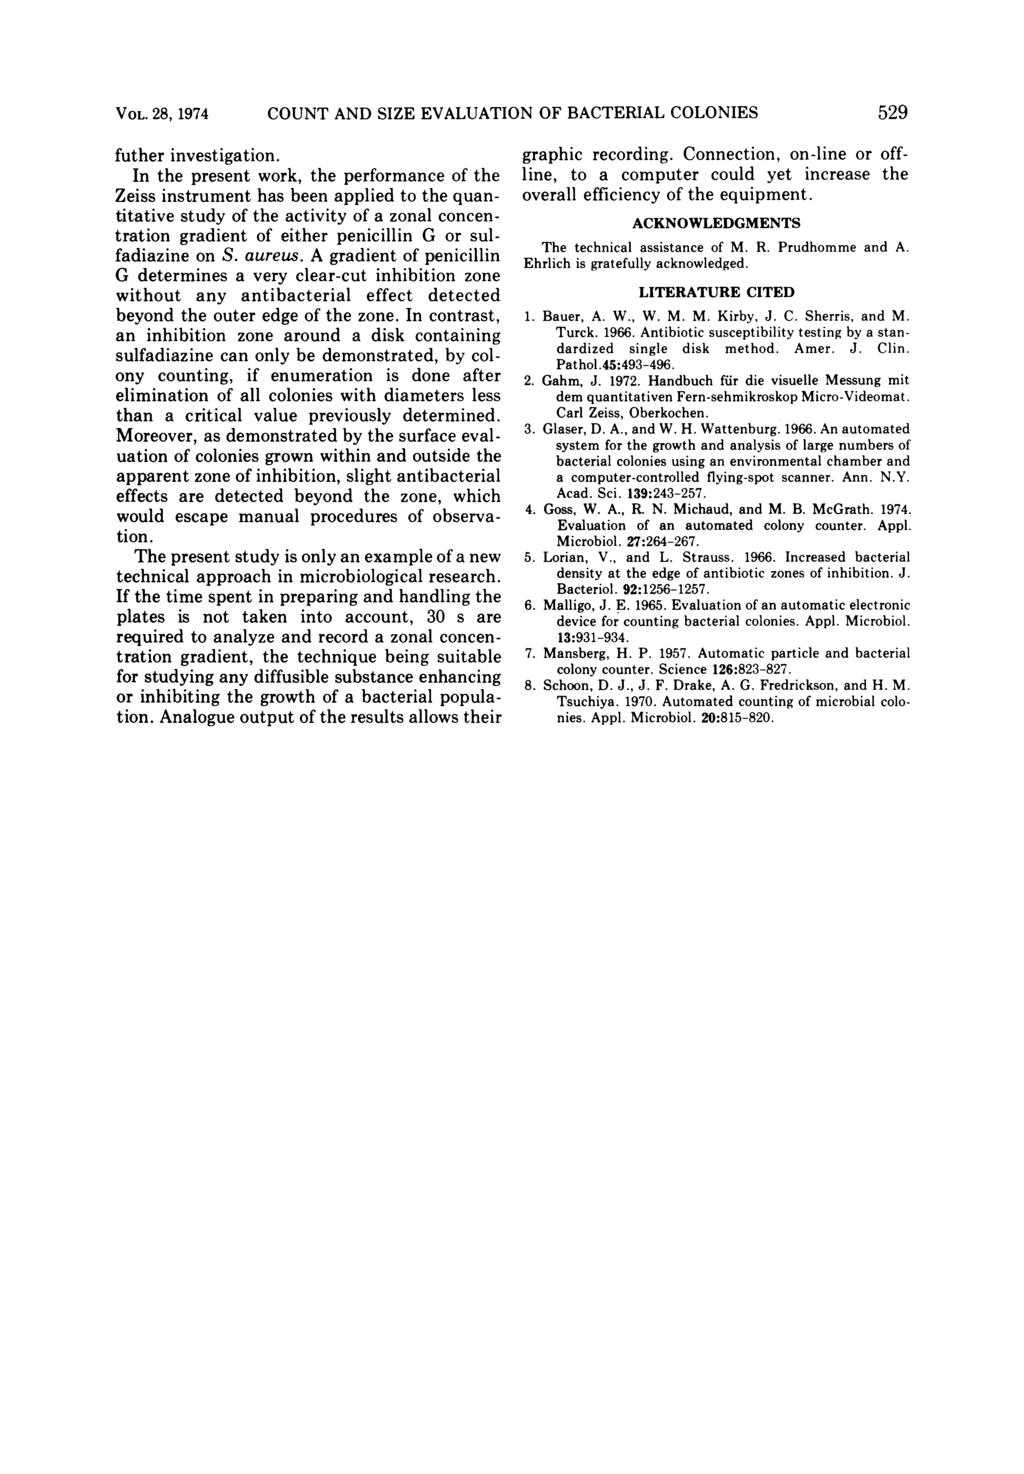 VOL. 28, 1974 COUNT AND SIZE EVALUATION OF BACTERIAL COLONIES futher investigation.